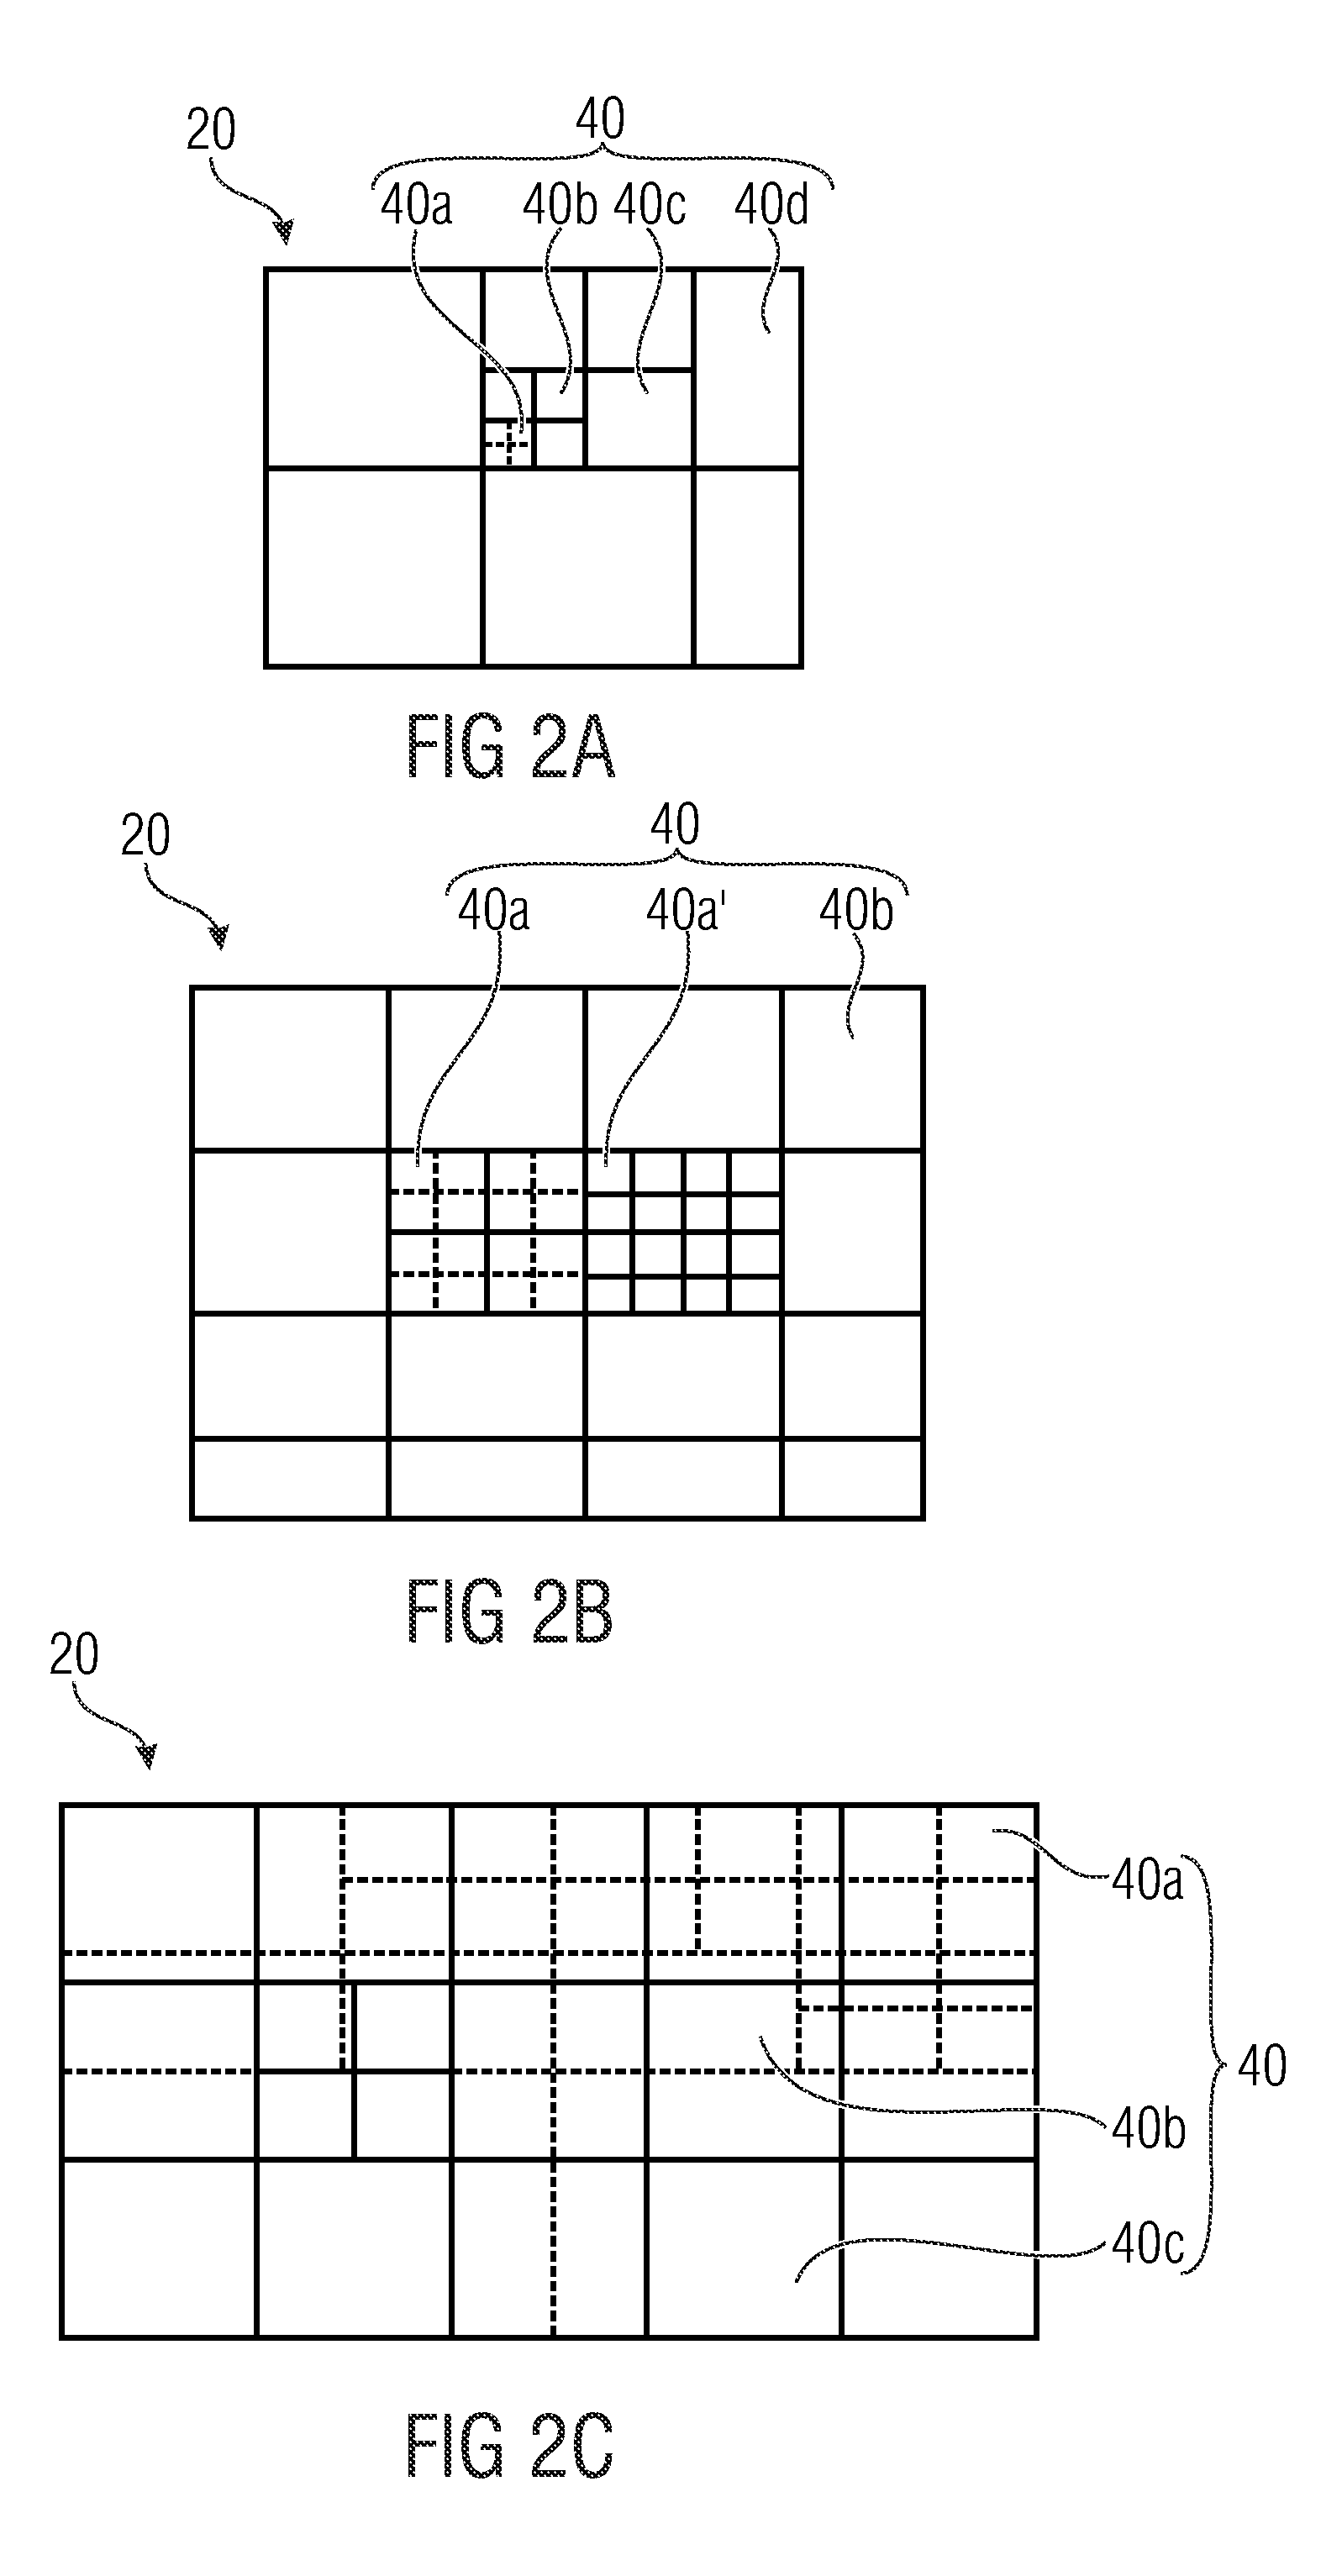 Entropy coding supporting mode switching